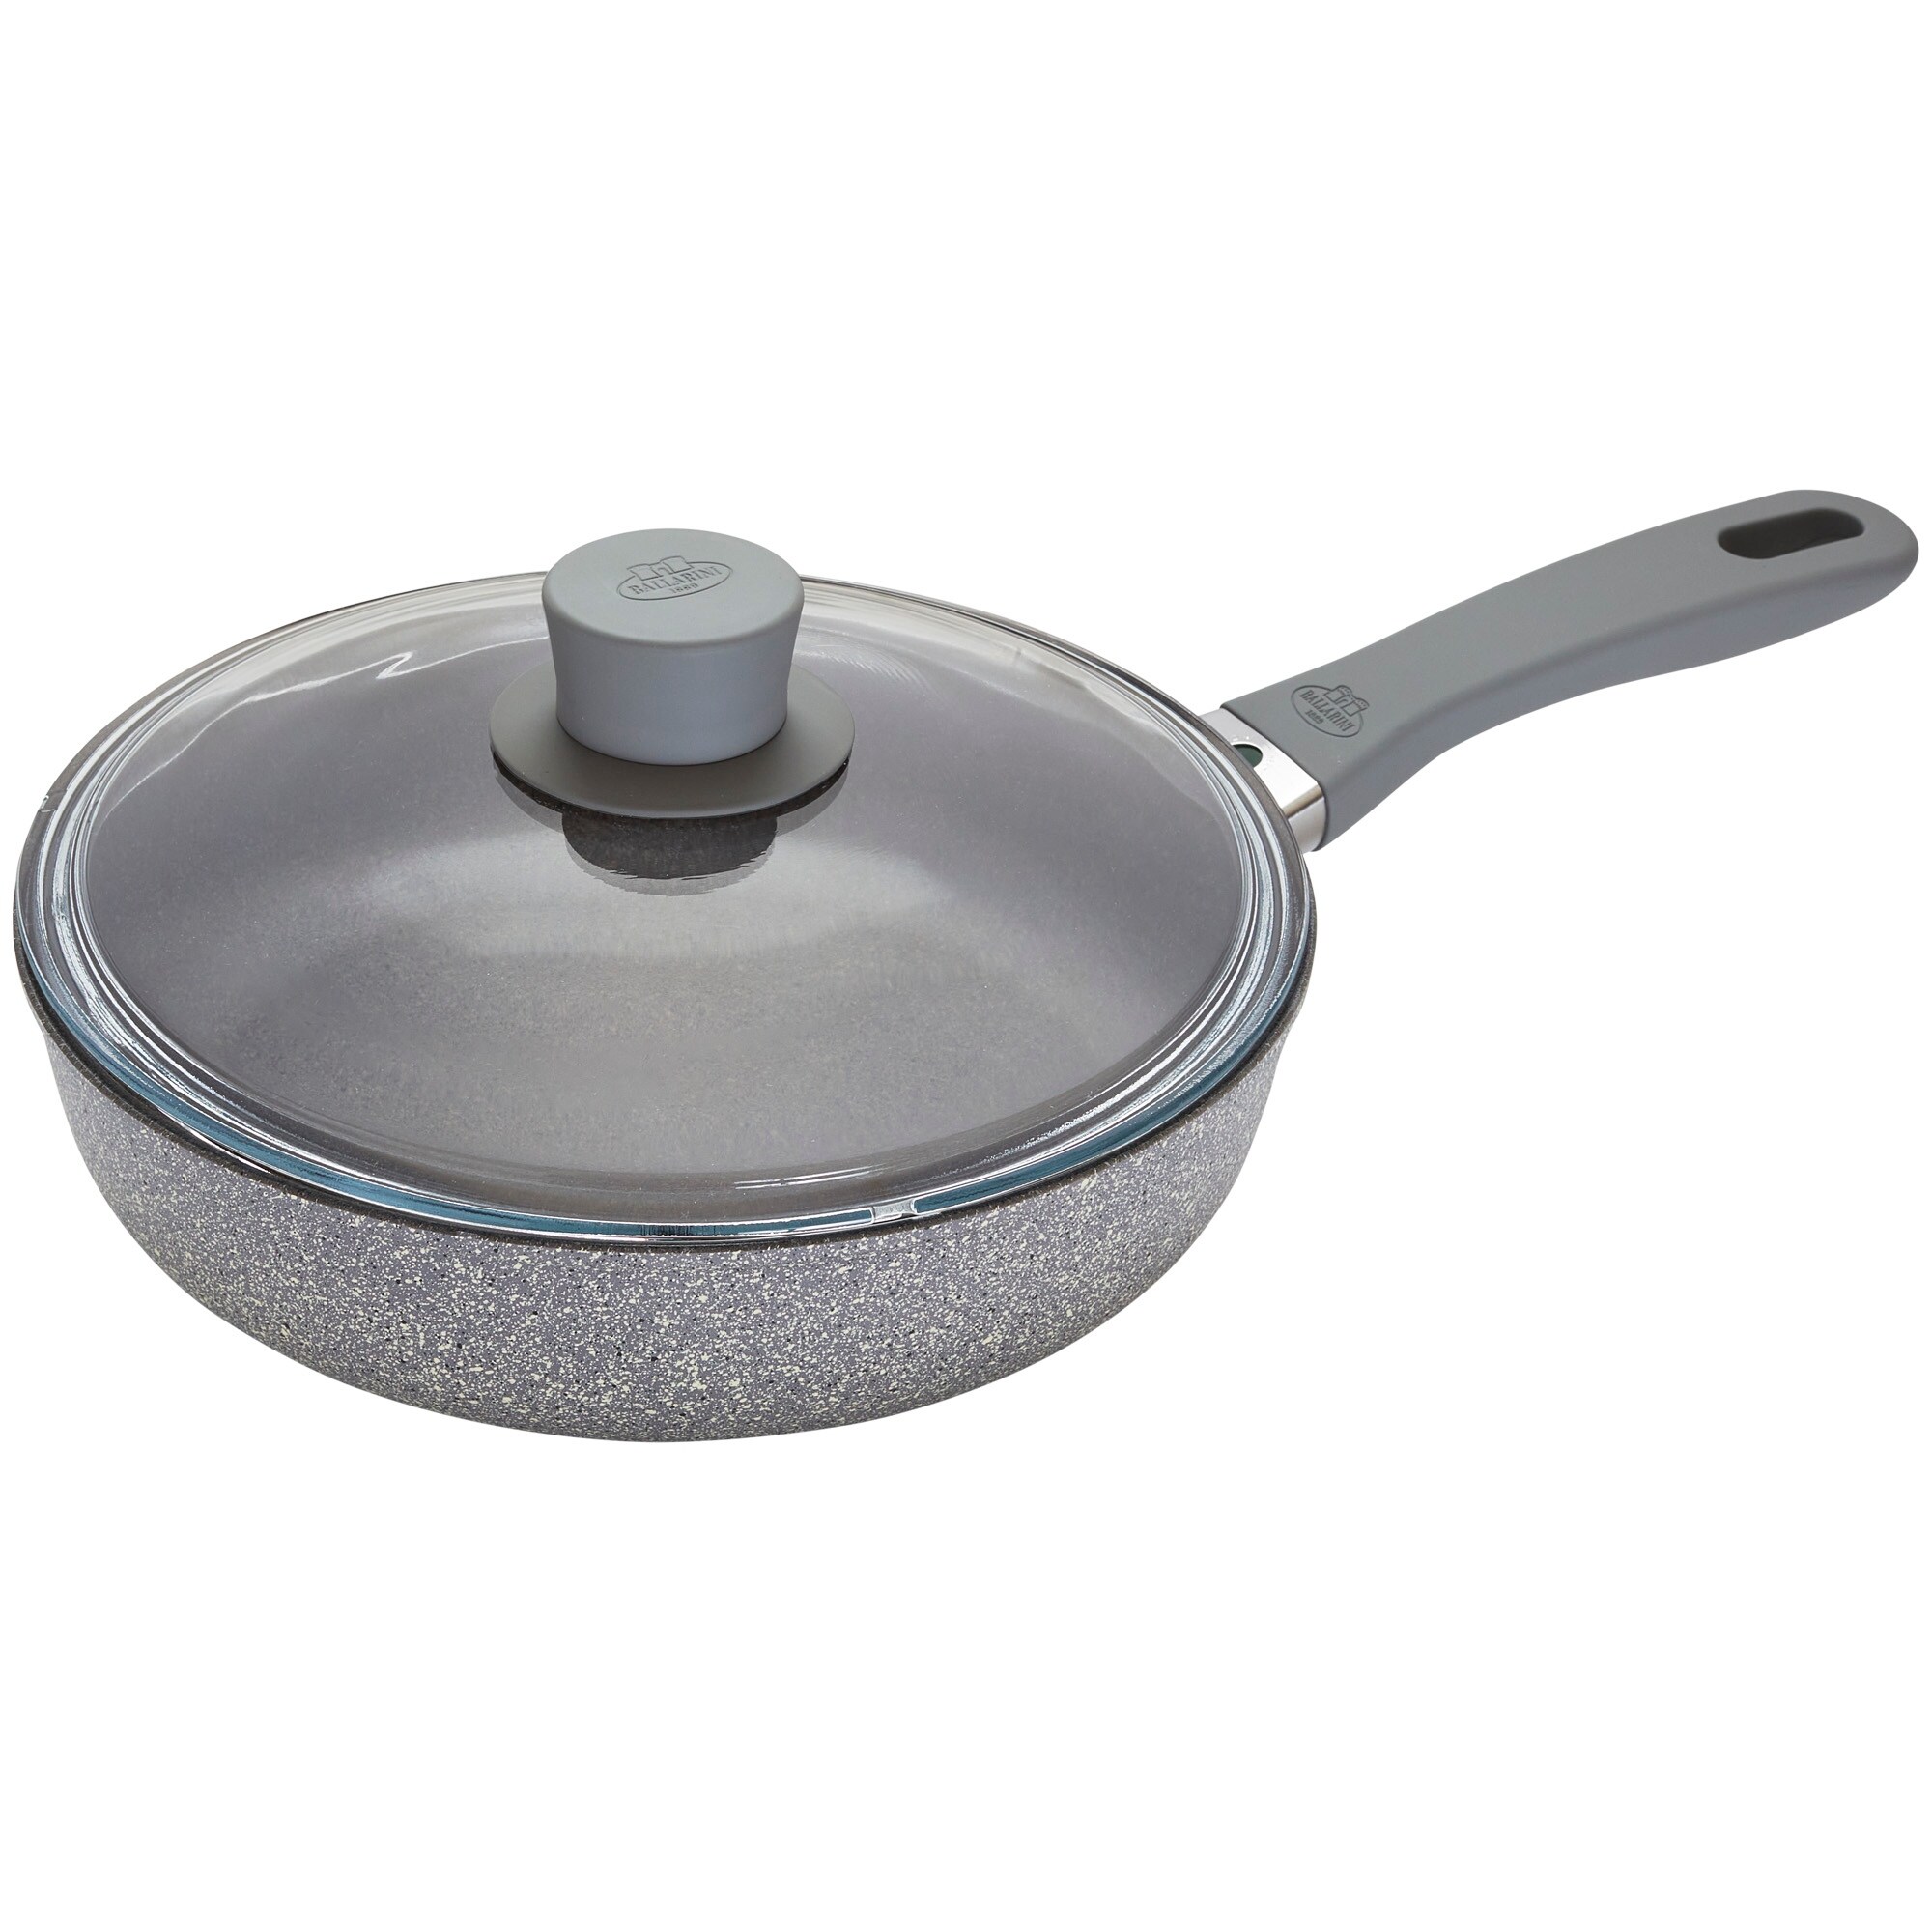 https://ak1.ostkcdn.com/images/products/is/images/direct/0d6e2ab3c81b3c5b3e8cab9762e8e53d21b386c6/Ballarini-Parma-Plus-Aluminum-Nonstick-Saut%C3%A9-Pan-with-Lid.jpg